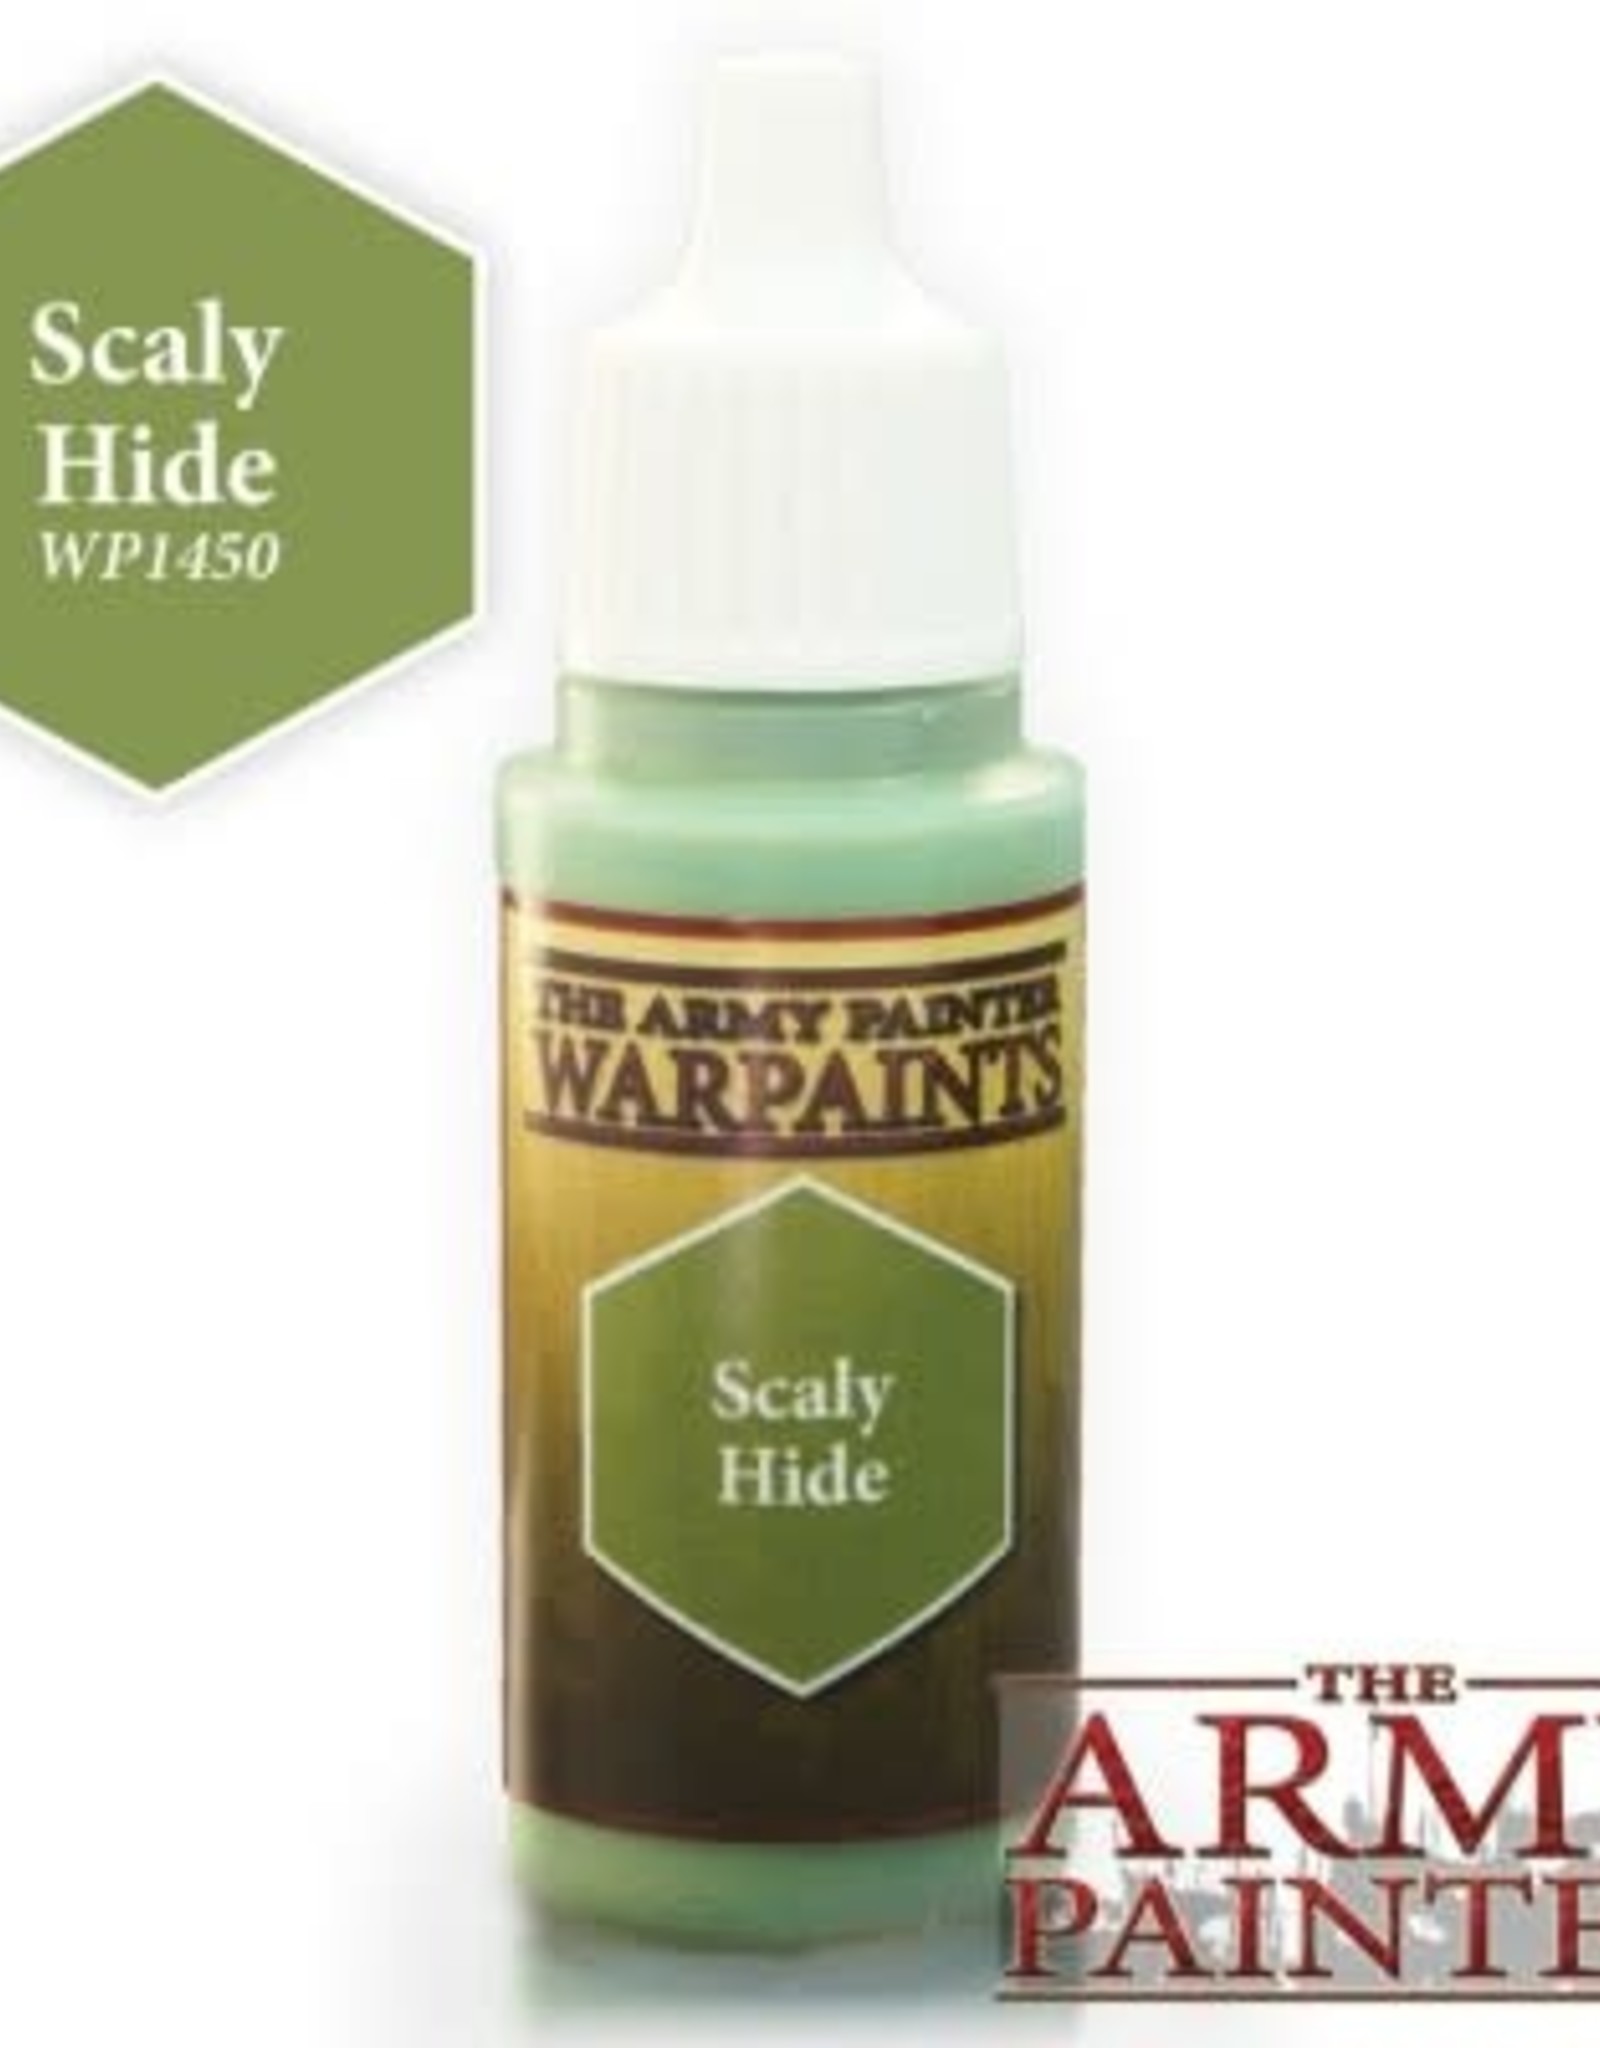 The Army Painter TAP Warpaint Scaly Hide